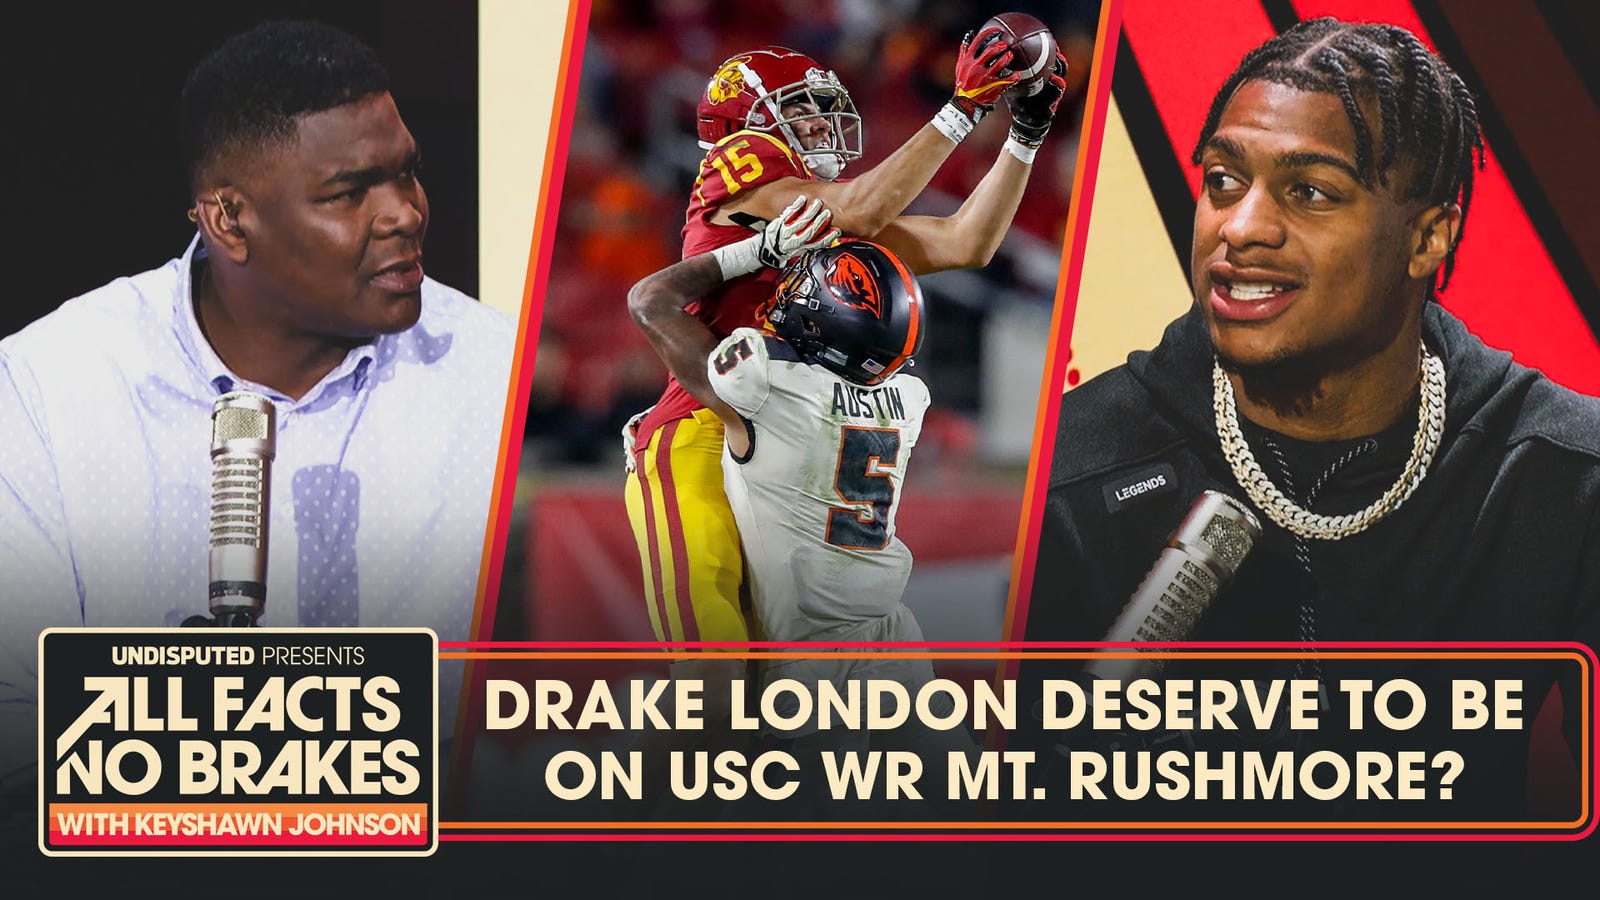 Does Drake London deserve to be on USC WRs Mt. Rushmore?